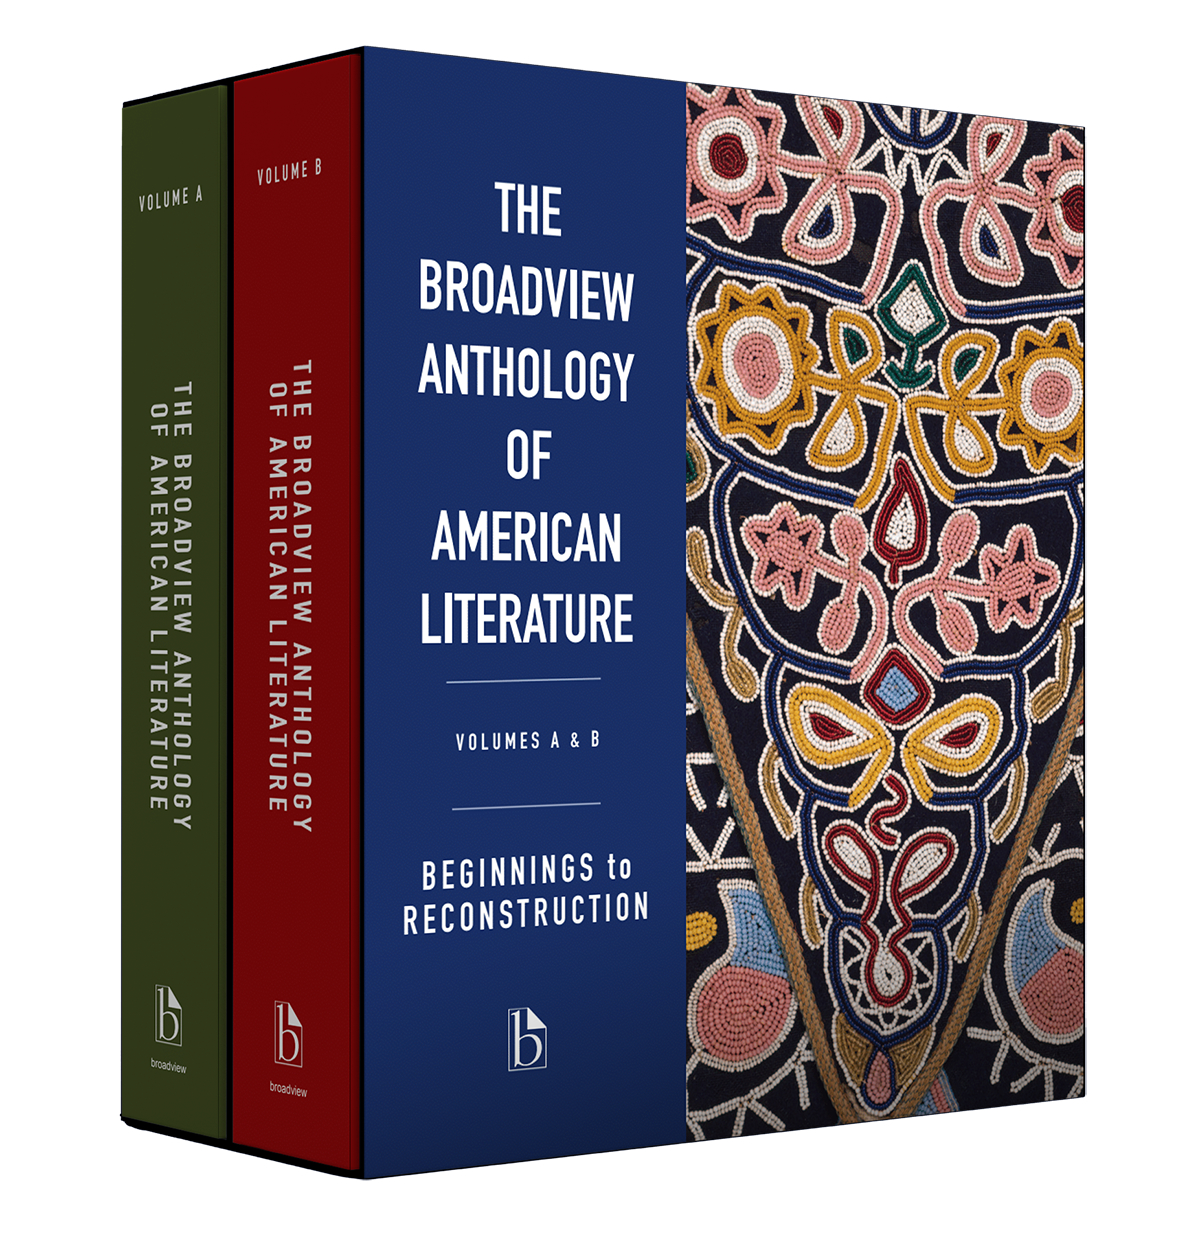 The　Broadview　A　of　Broadview　Volumes　Reconstruction　Anthology　American　Literature　to　B:　Beginnings　Press